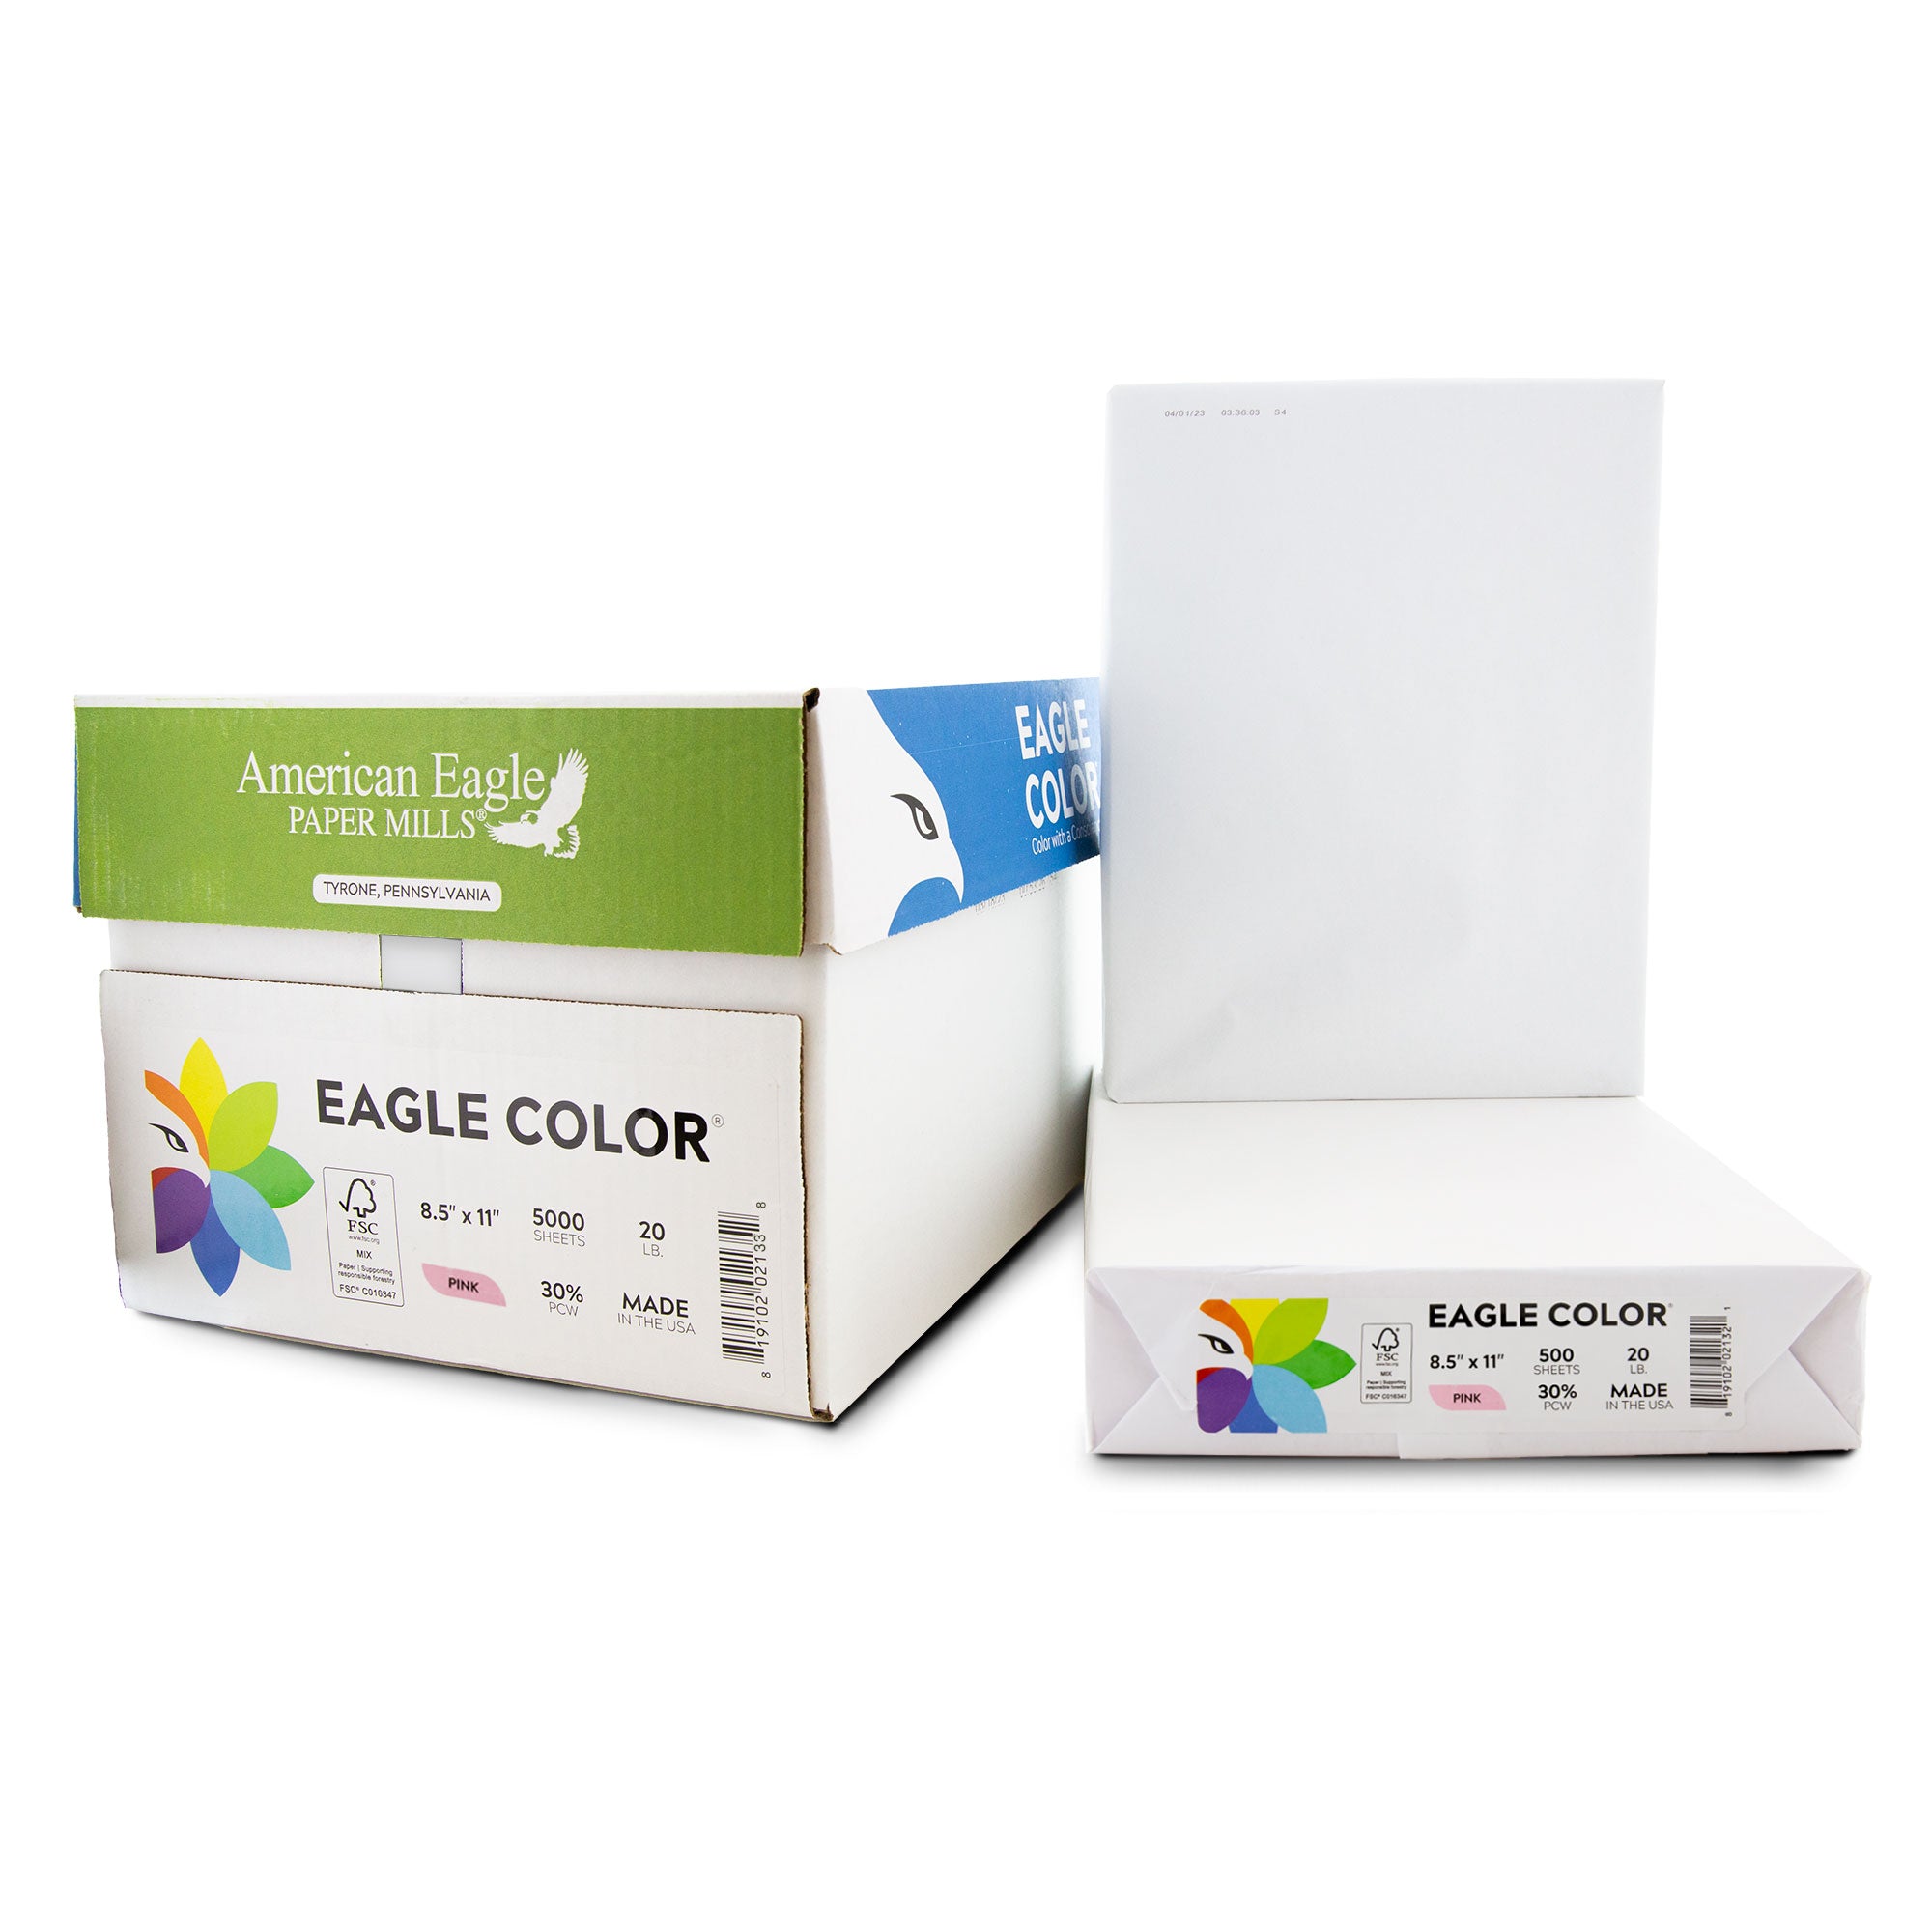 Staples Copy Paper, 8.5 x 11, 30% Recycled - 500 sheets